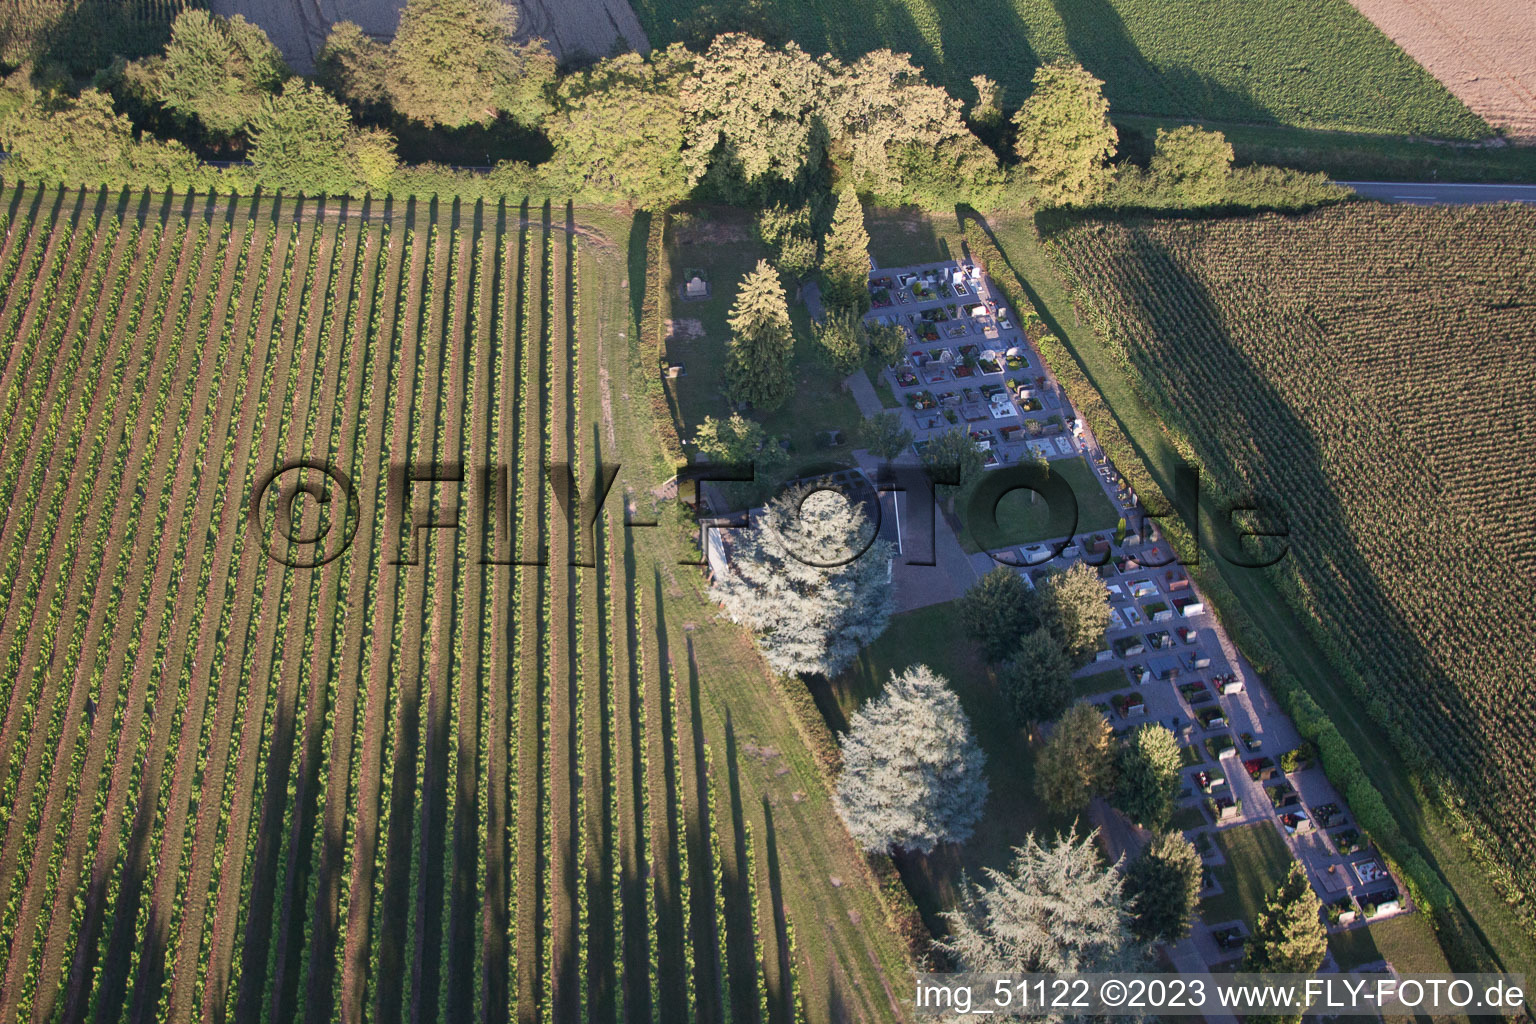 Aerial view of Cemetery in the district Mühlhofen in Billigheim-Ingenheim in the state Rhineland-Palatinate, Germany